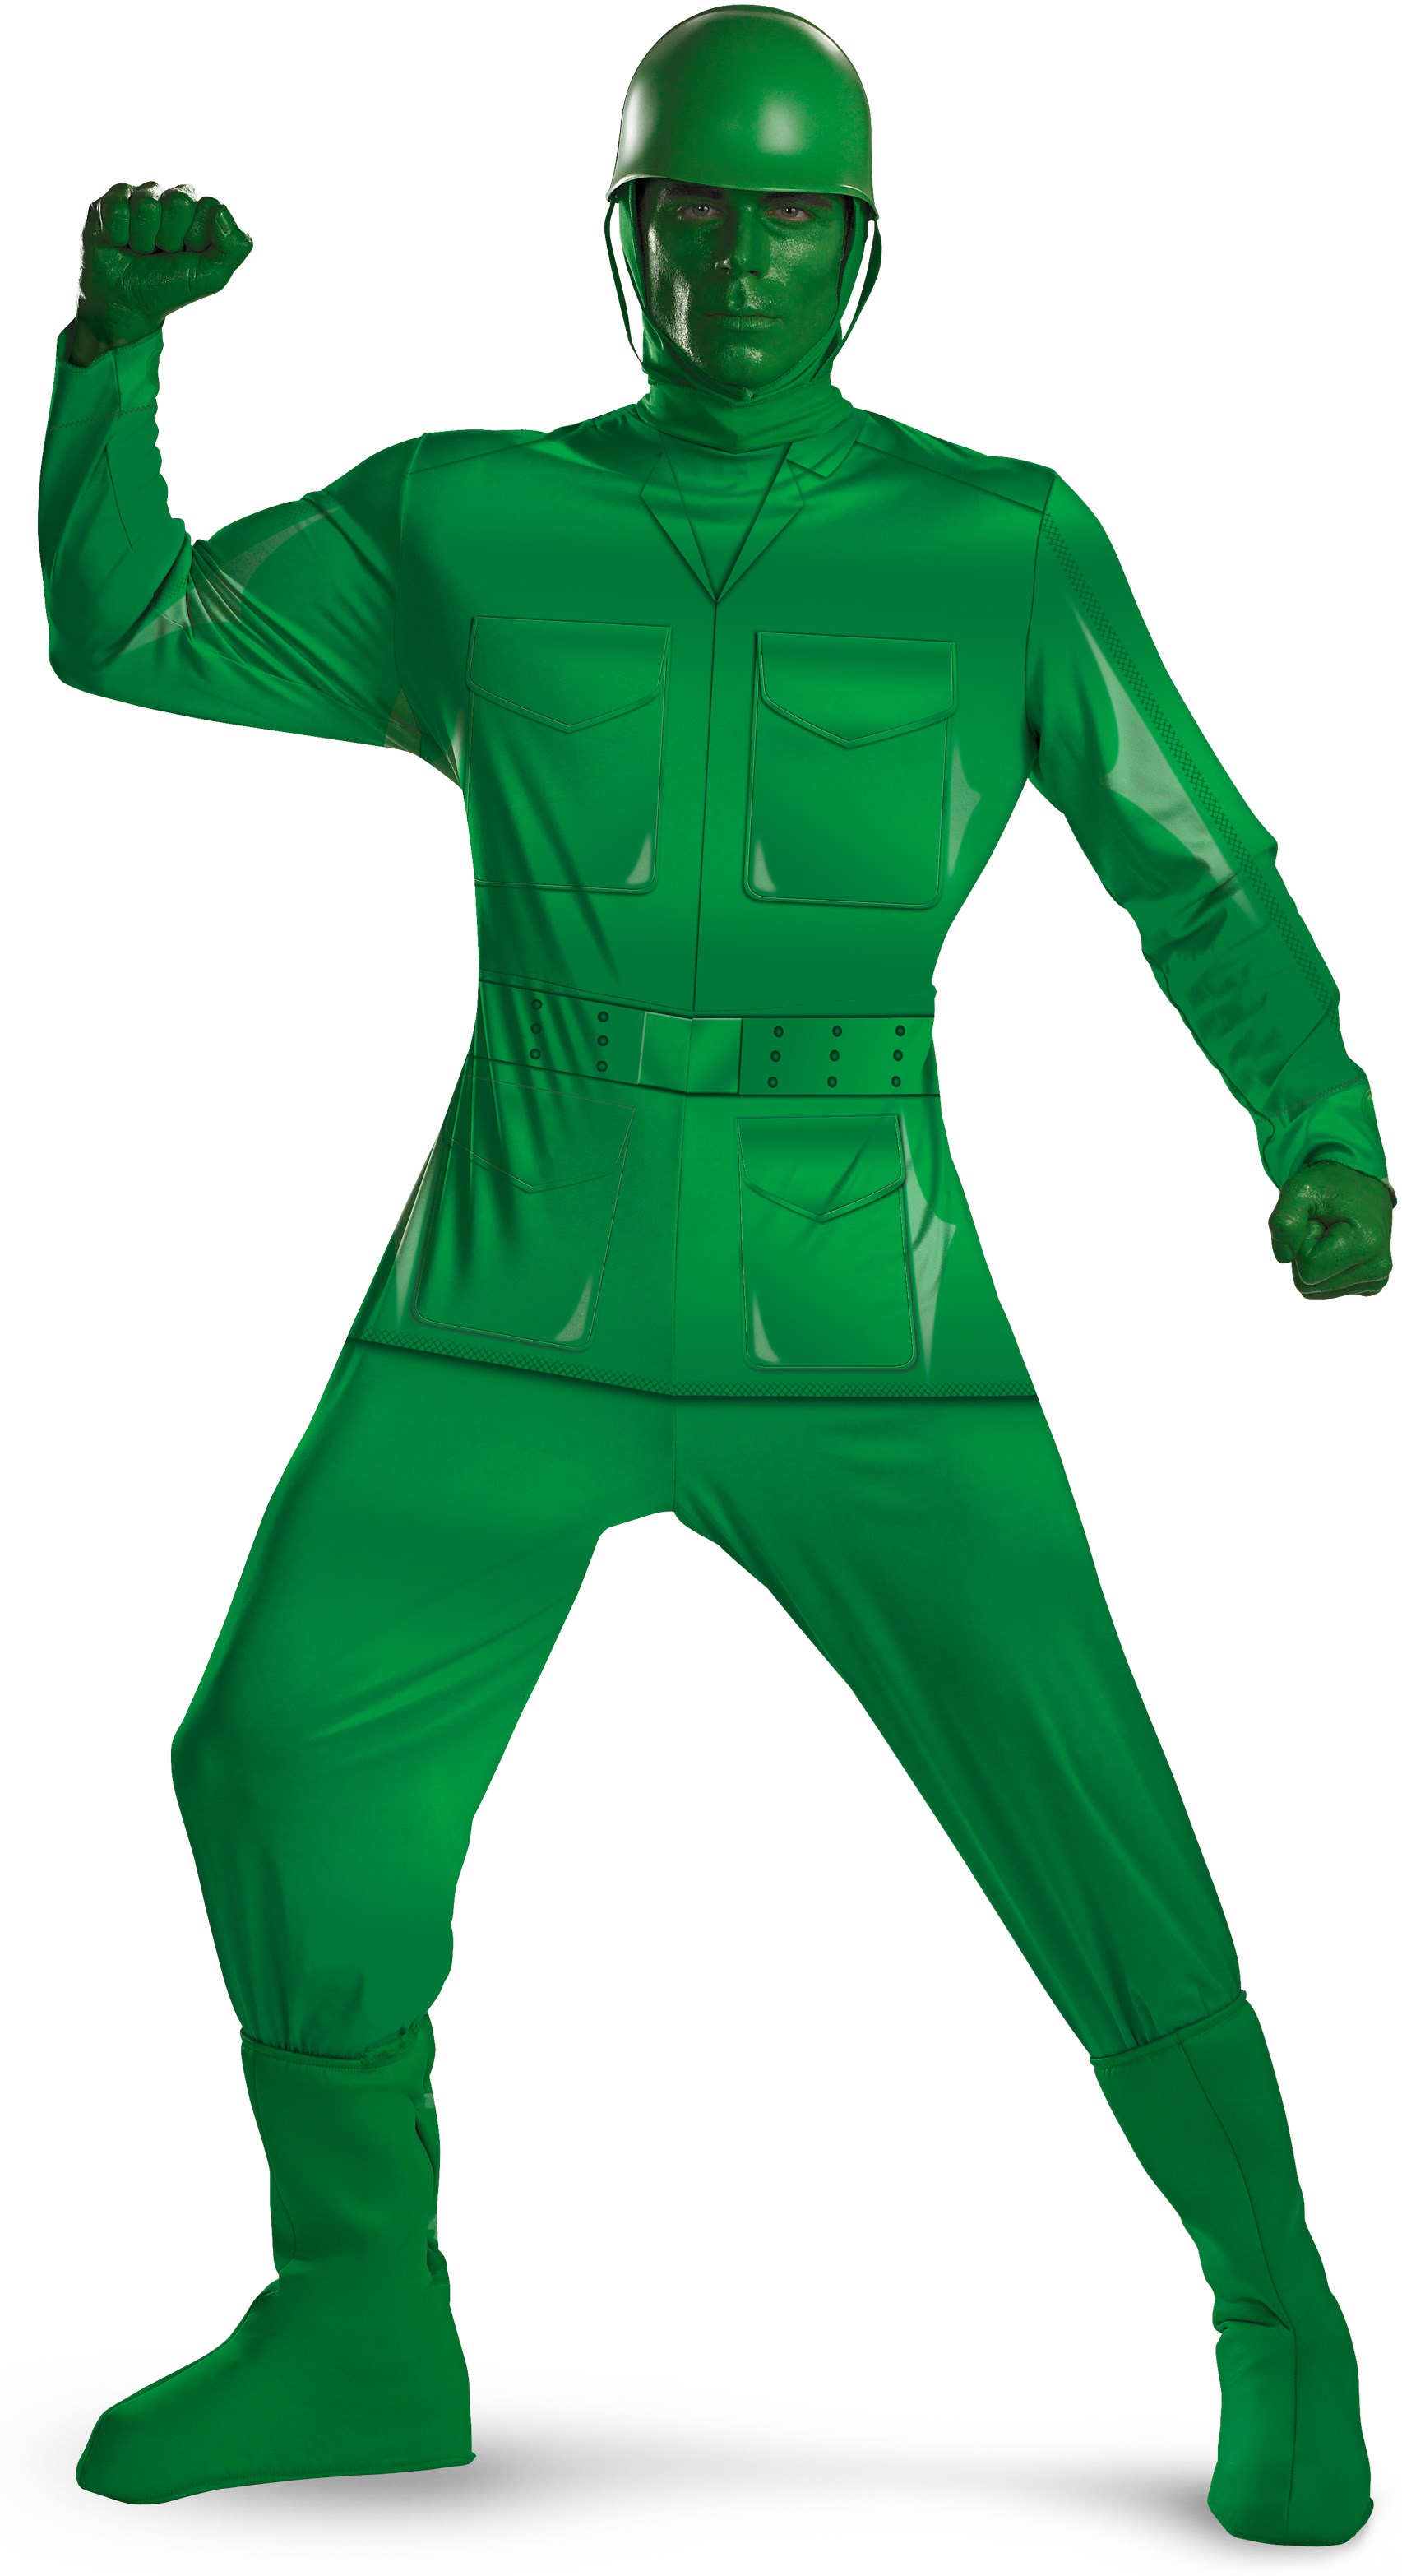 Toy Story - Green Army Man Deluxe Adult Costume